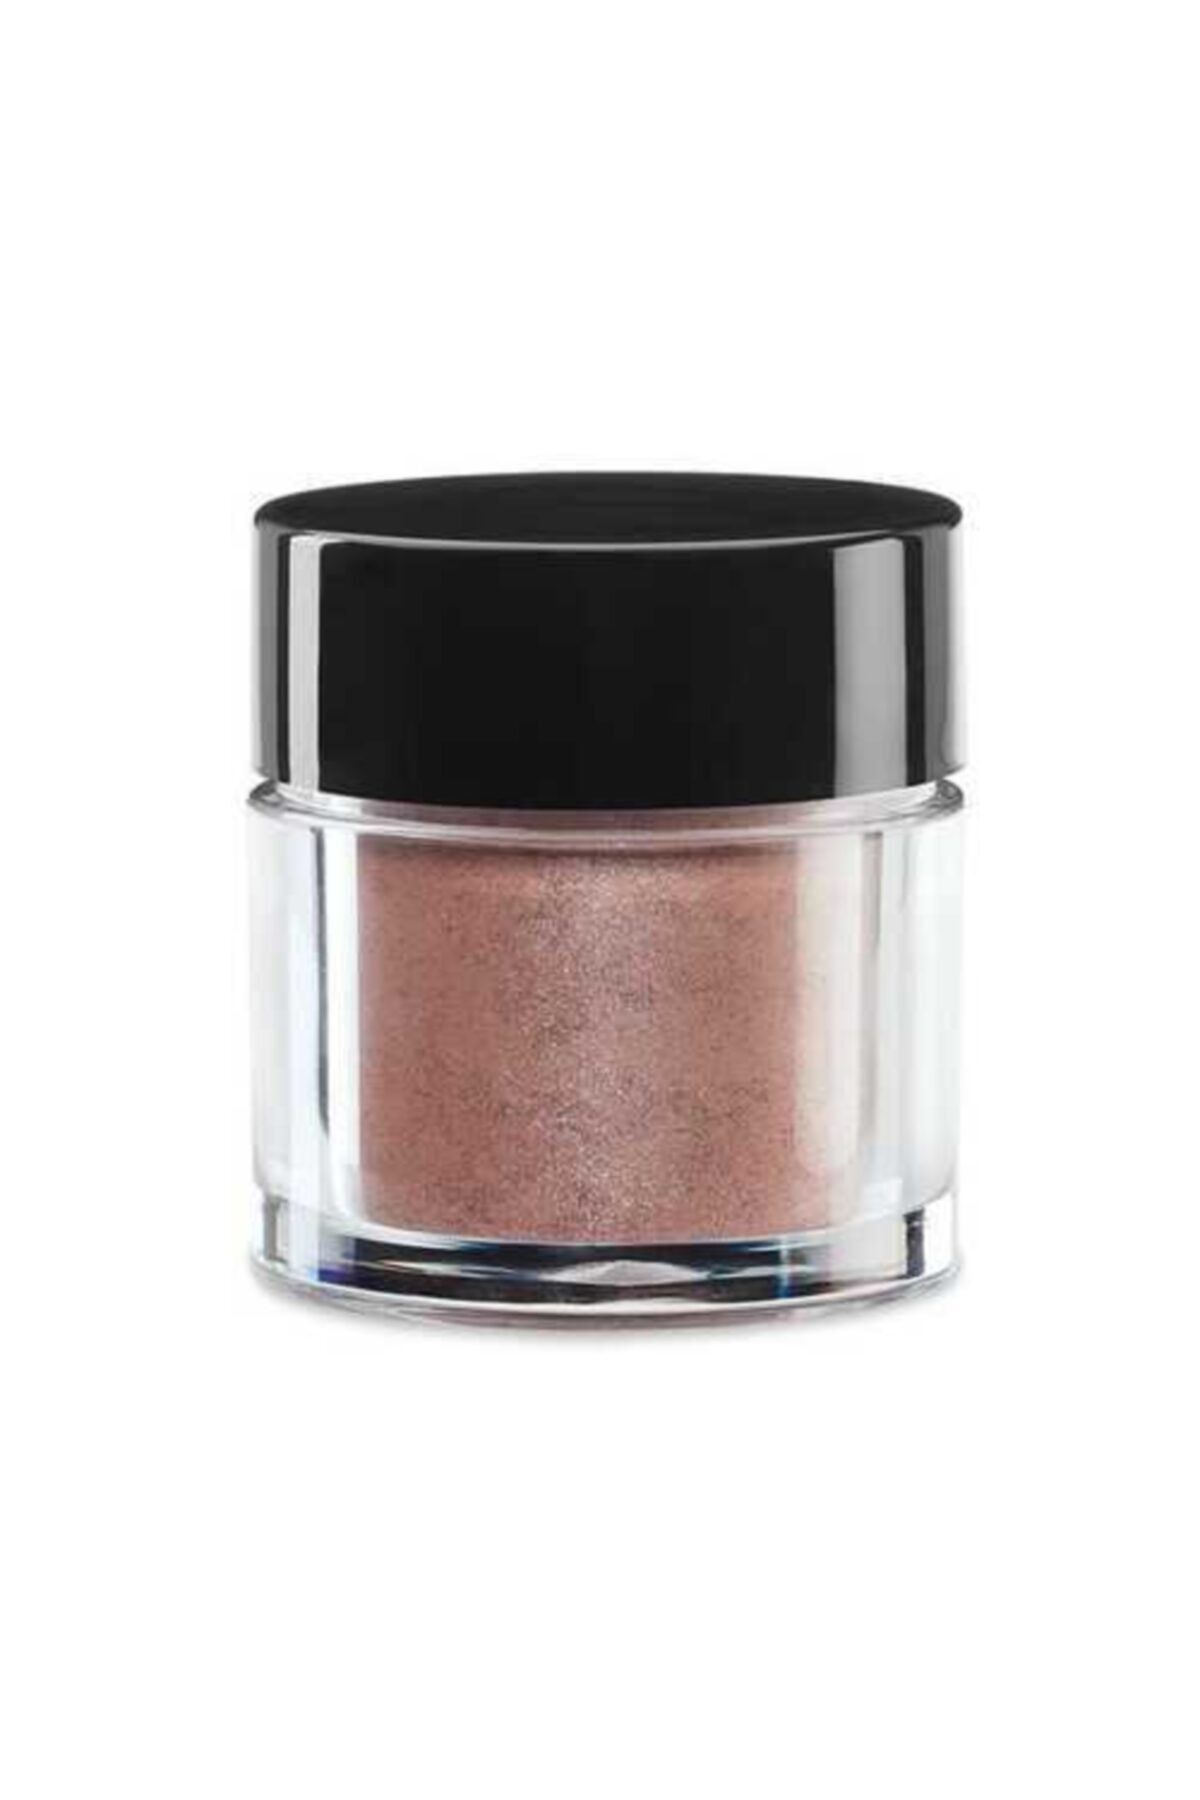 Youngblood Granite Youngblood Crushed Mineral Eyeshadow 2 gr Toz Mineral Far